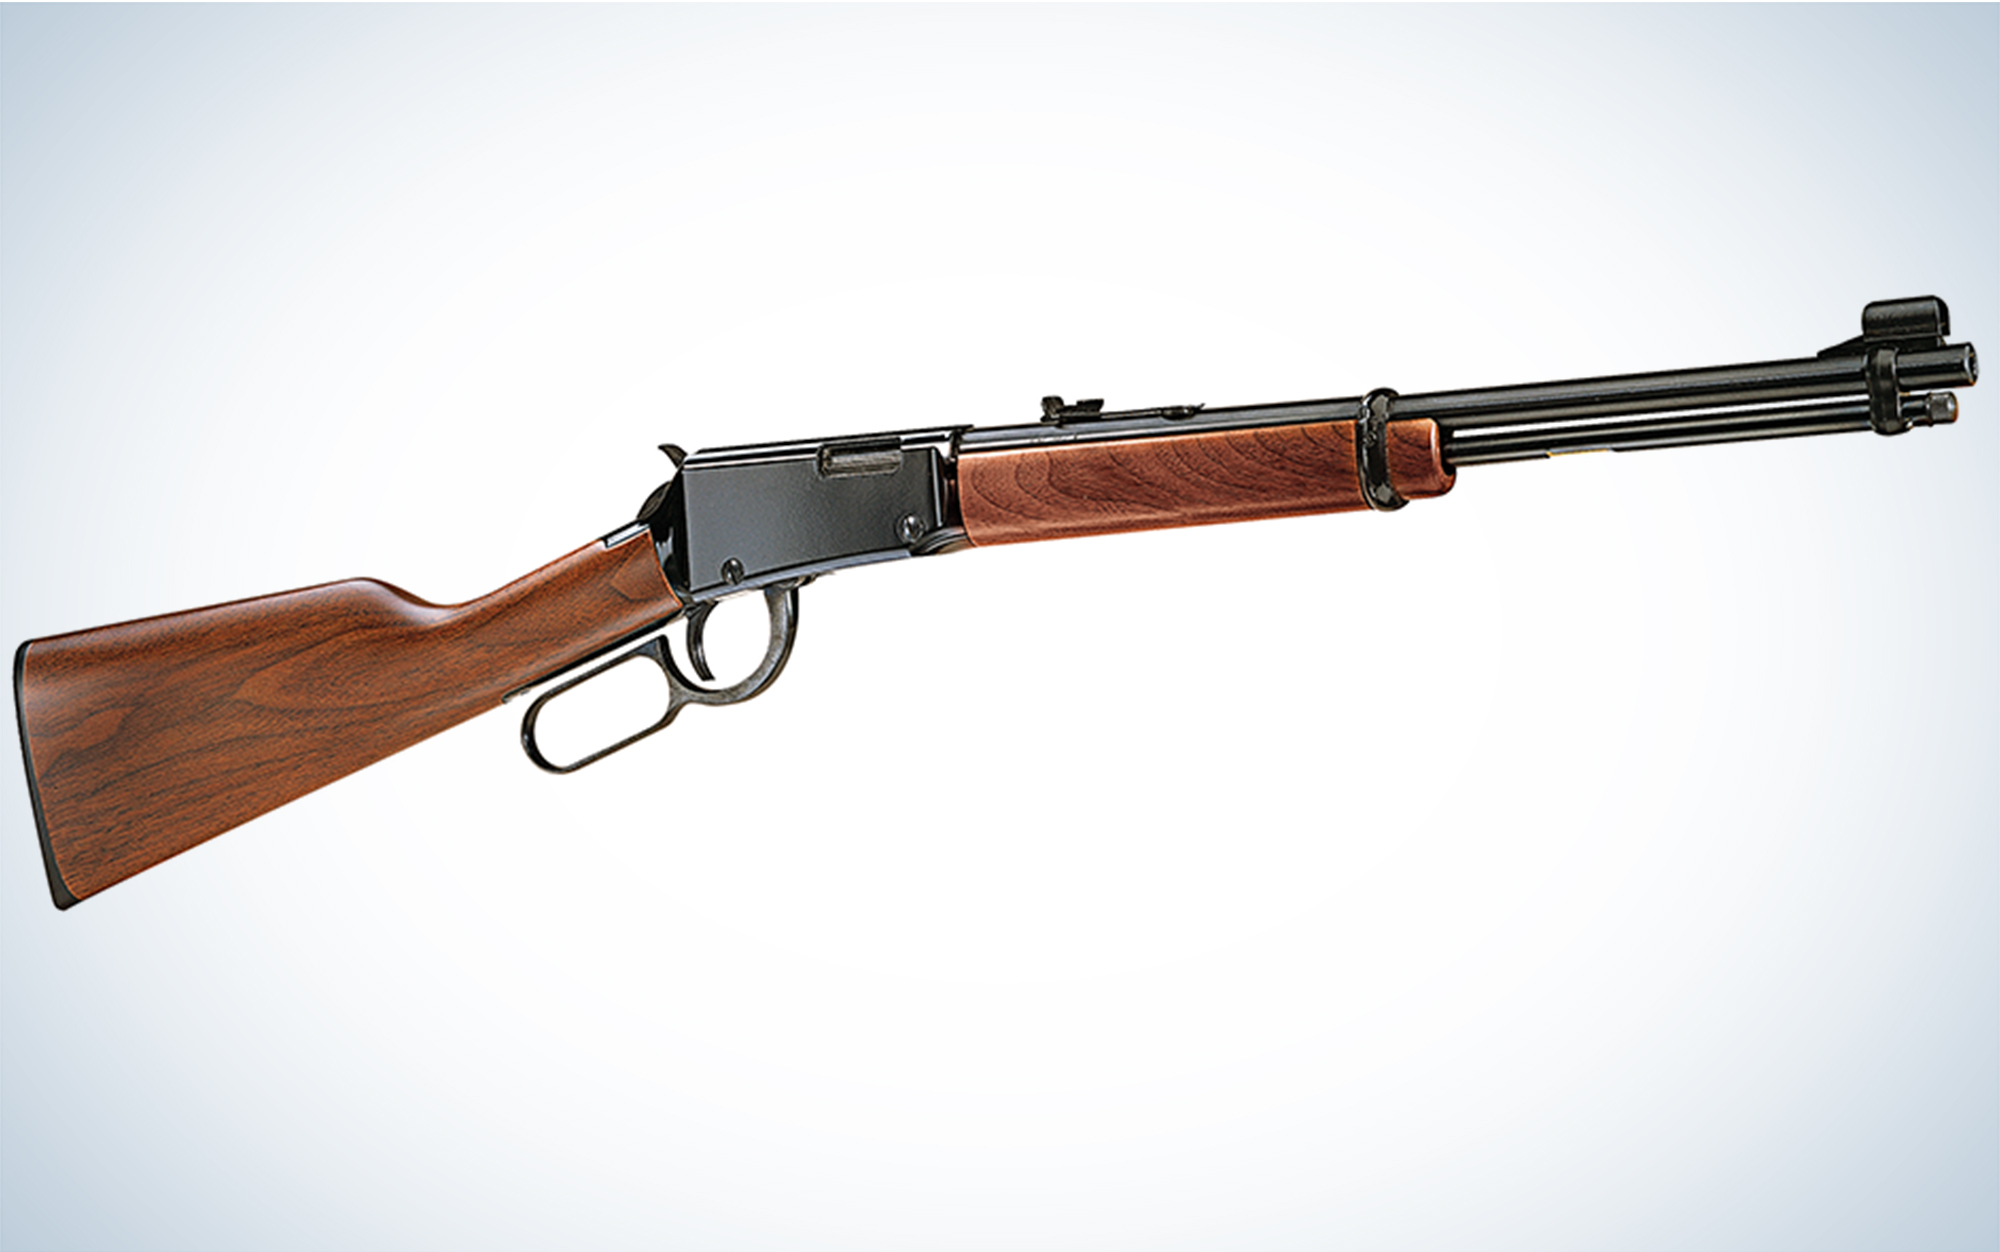 The Henry Classic Lever-Action is a contemporary classic gun for rabbit hunting.